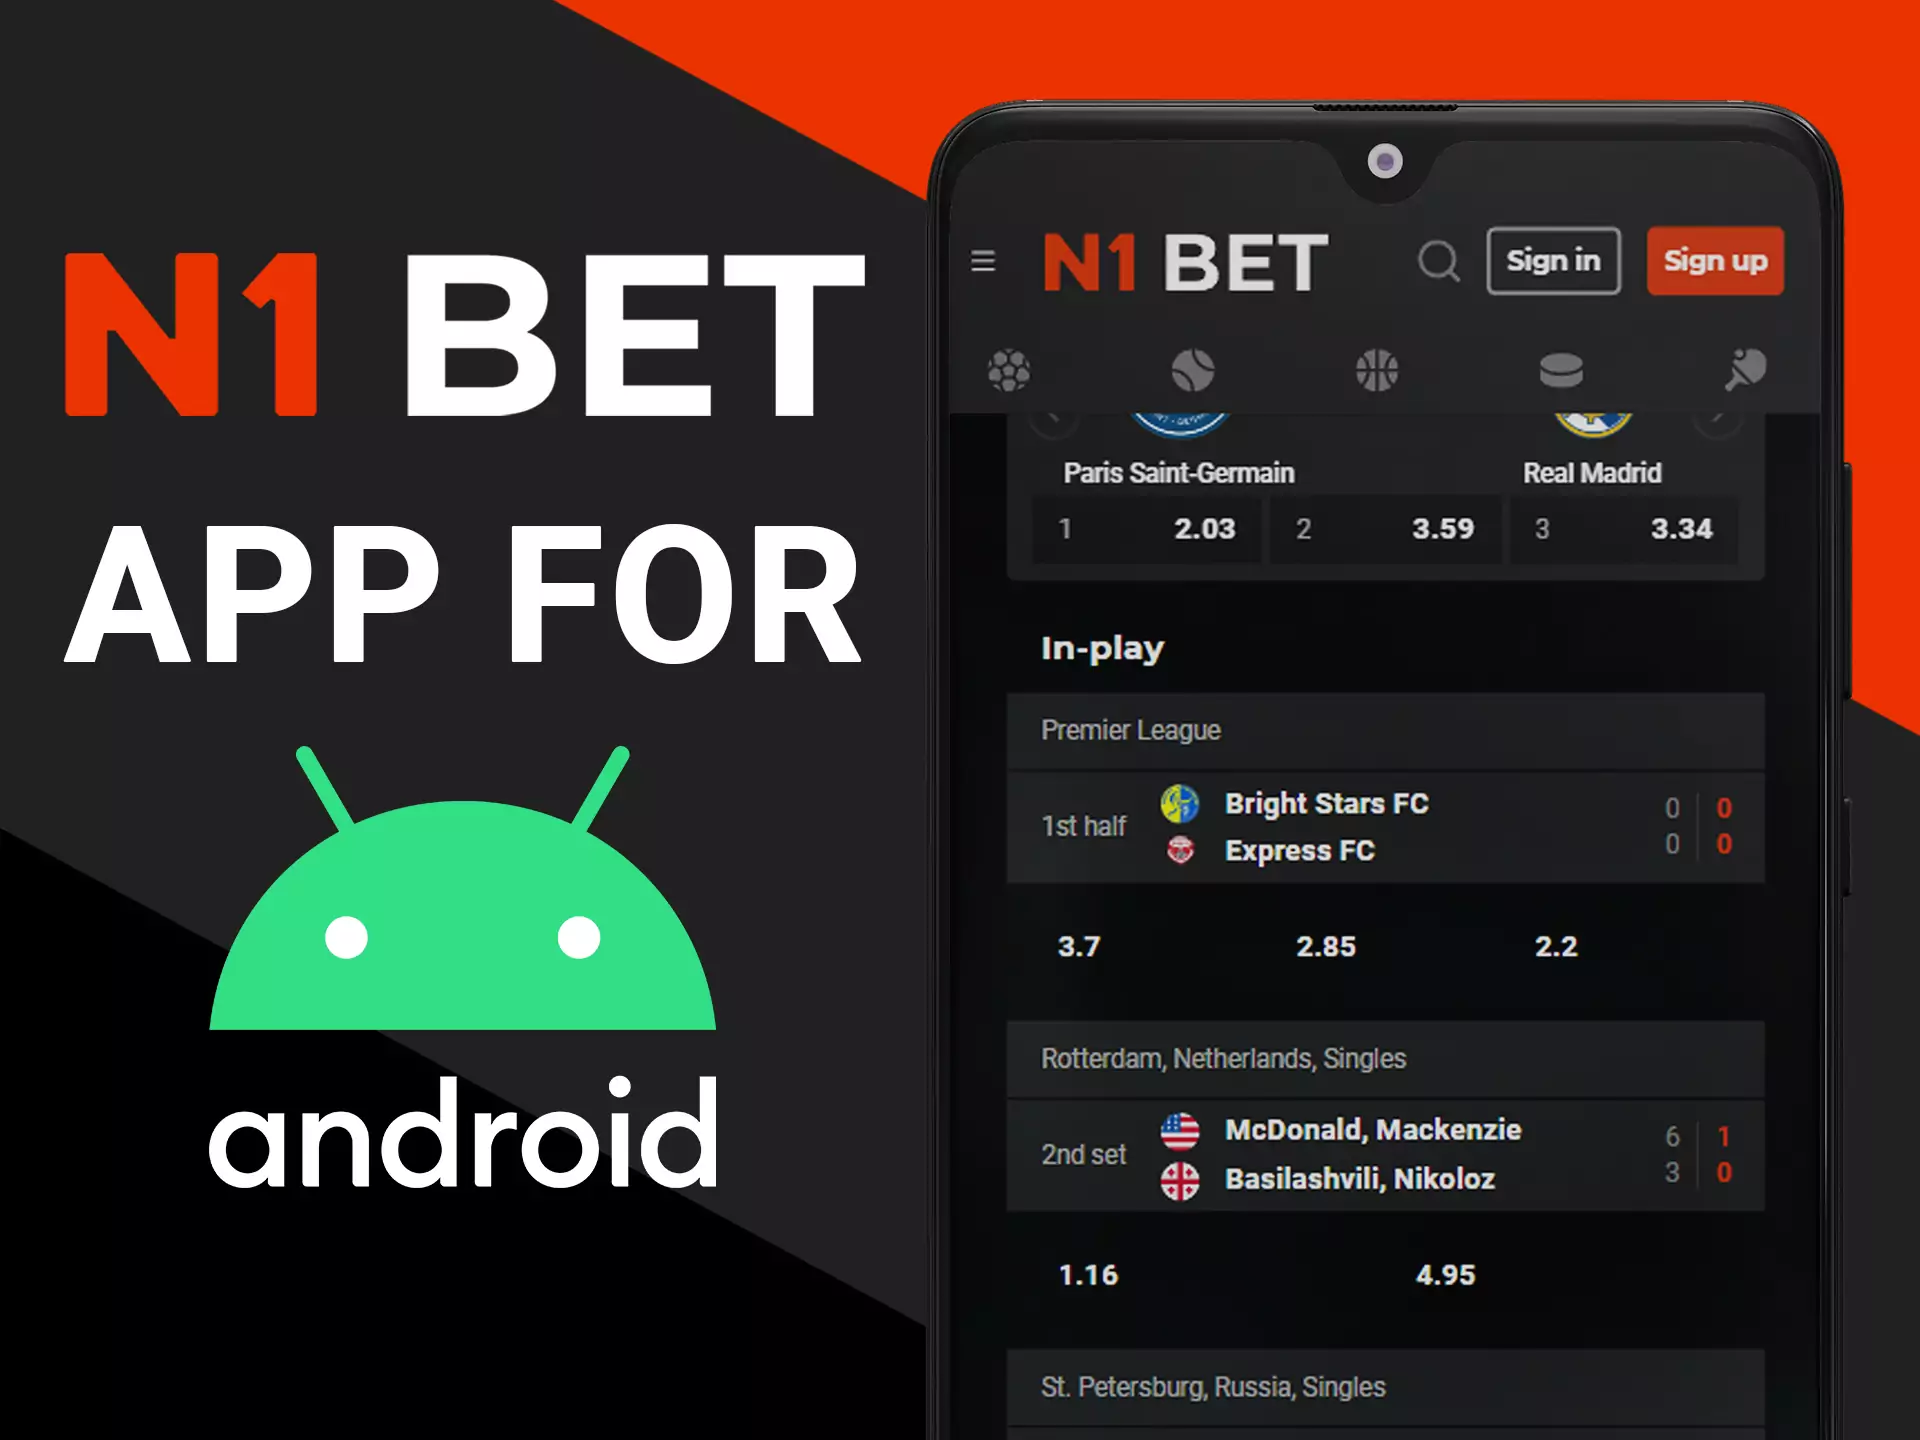 Install N1Bet Android app on your phone.